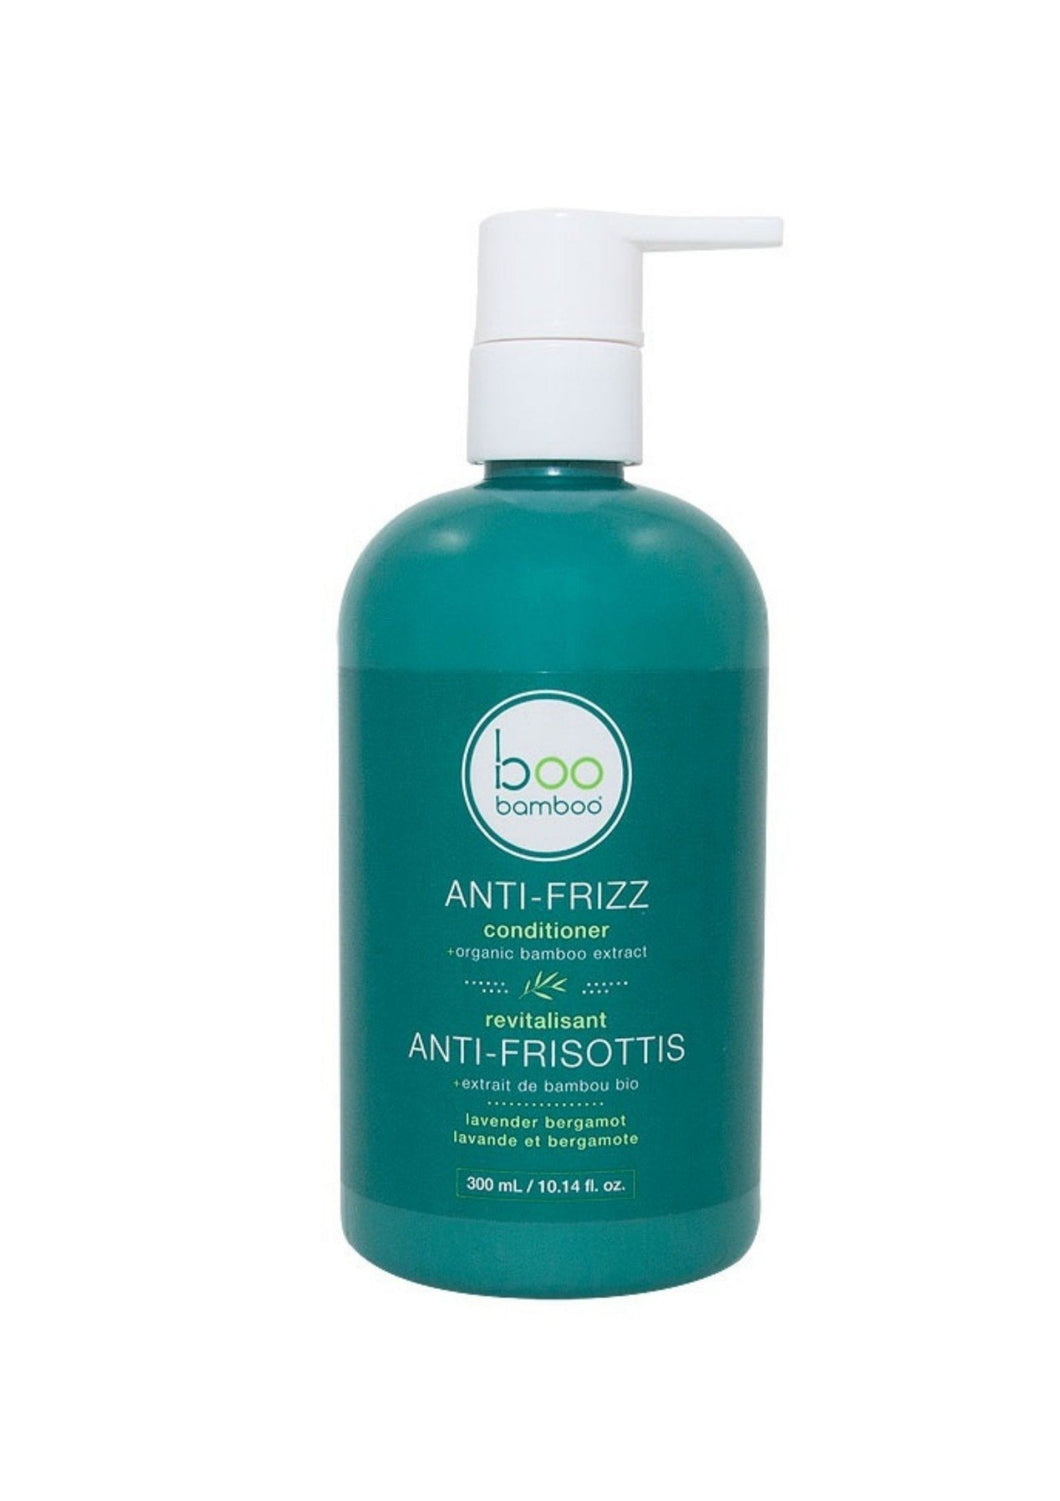 Defy frizz and fly-away hairs, repair damaged hair and moisturize with the Anti-Frizz Conditioner packed with Vitamin B5 and algae extracts. boo bamboo's lavender fragranced formula works from the inside out provide a smoother and healthier appearance for your hair. 300ml $13.00